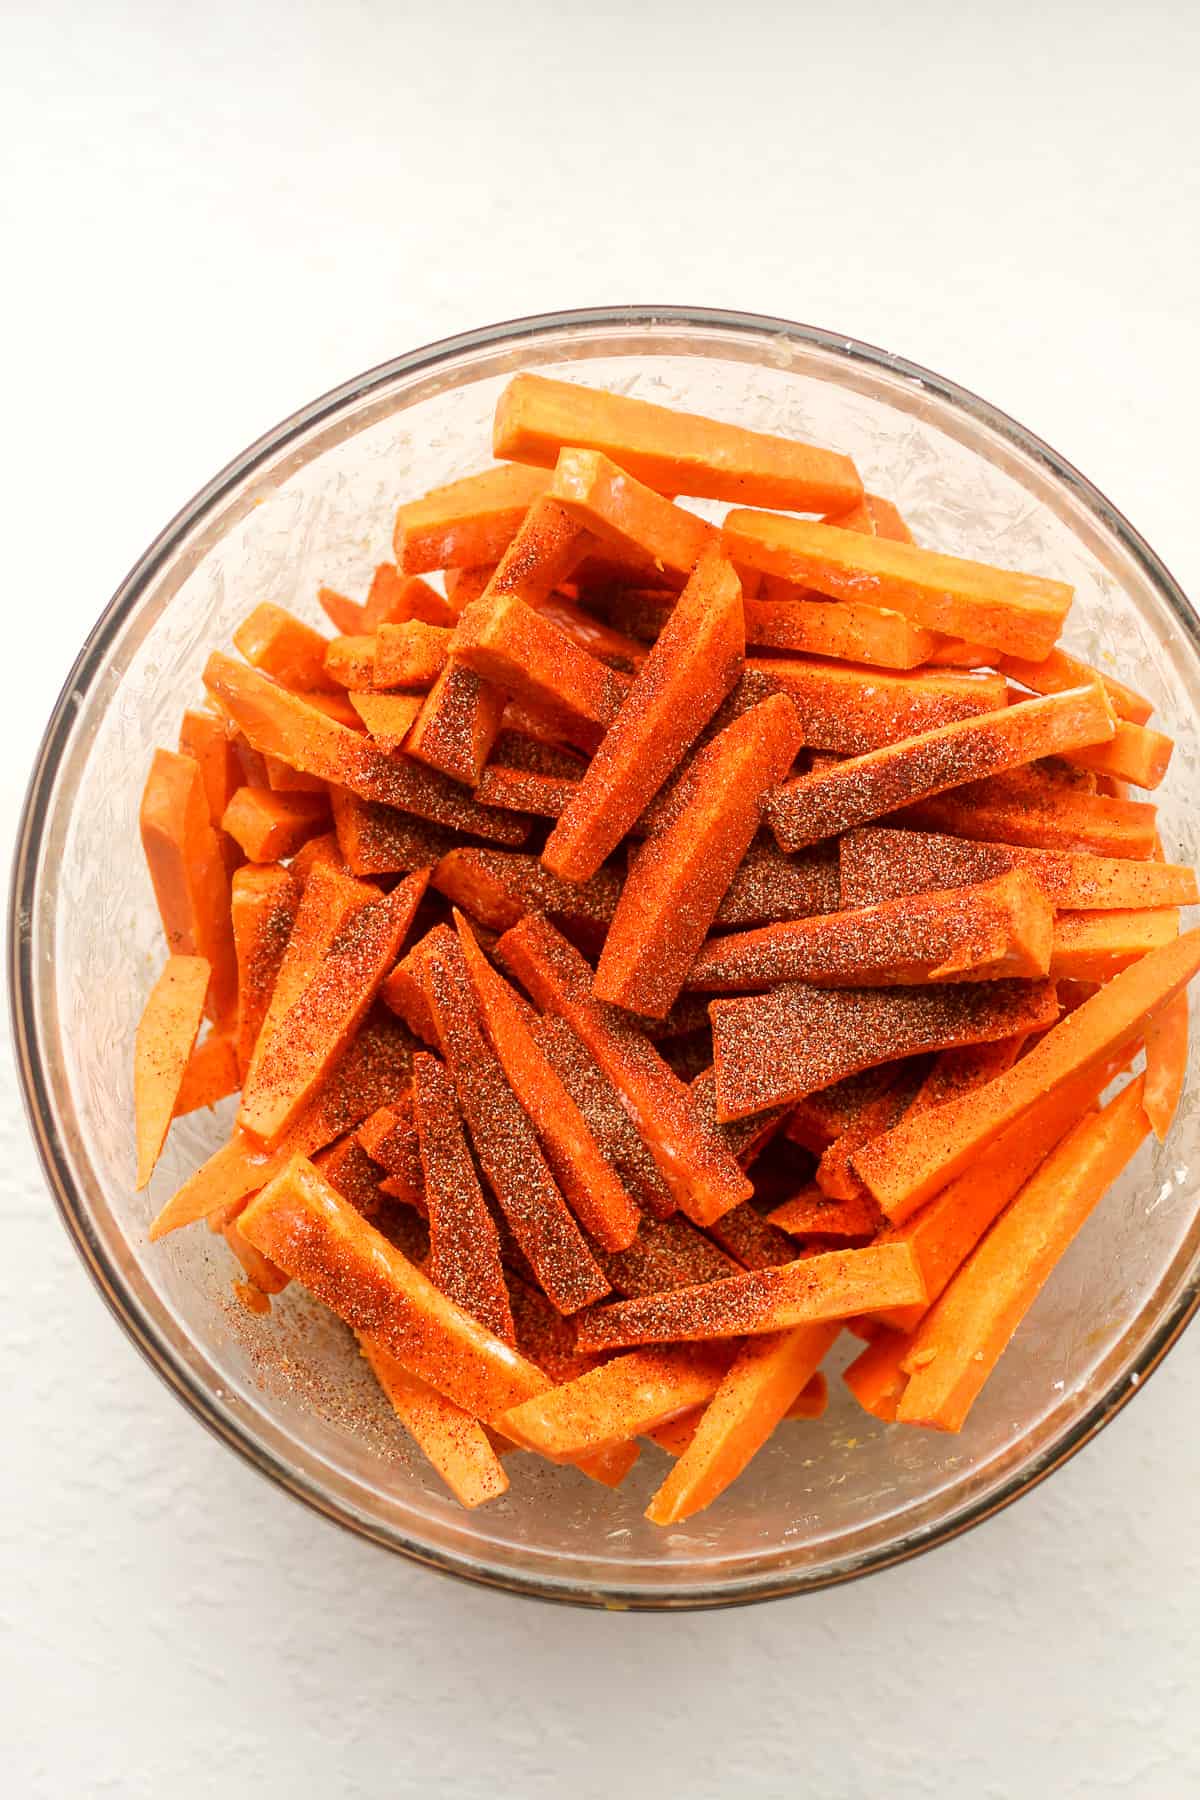 A bowl of sweet potato fries with the spicy seasonings.